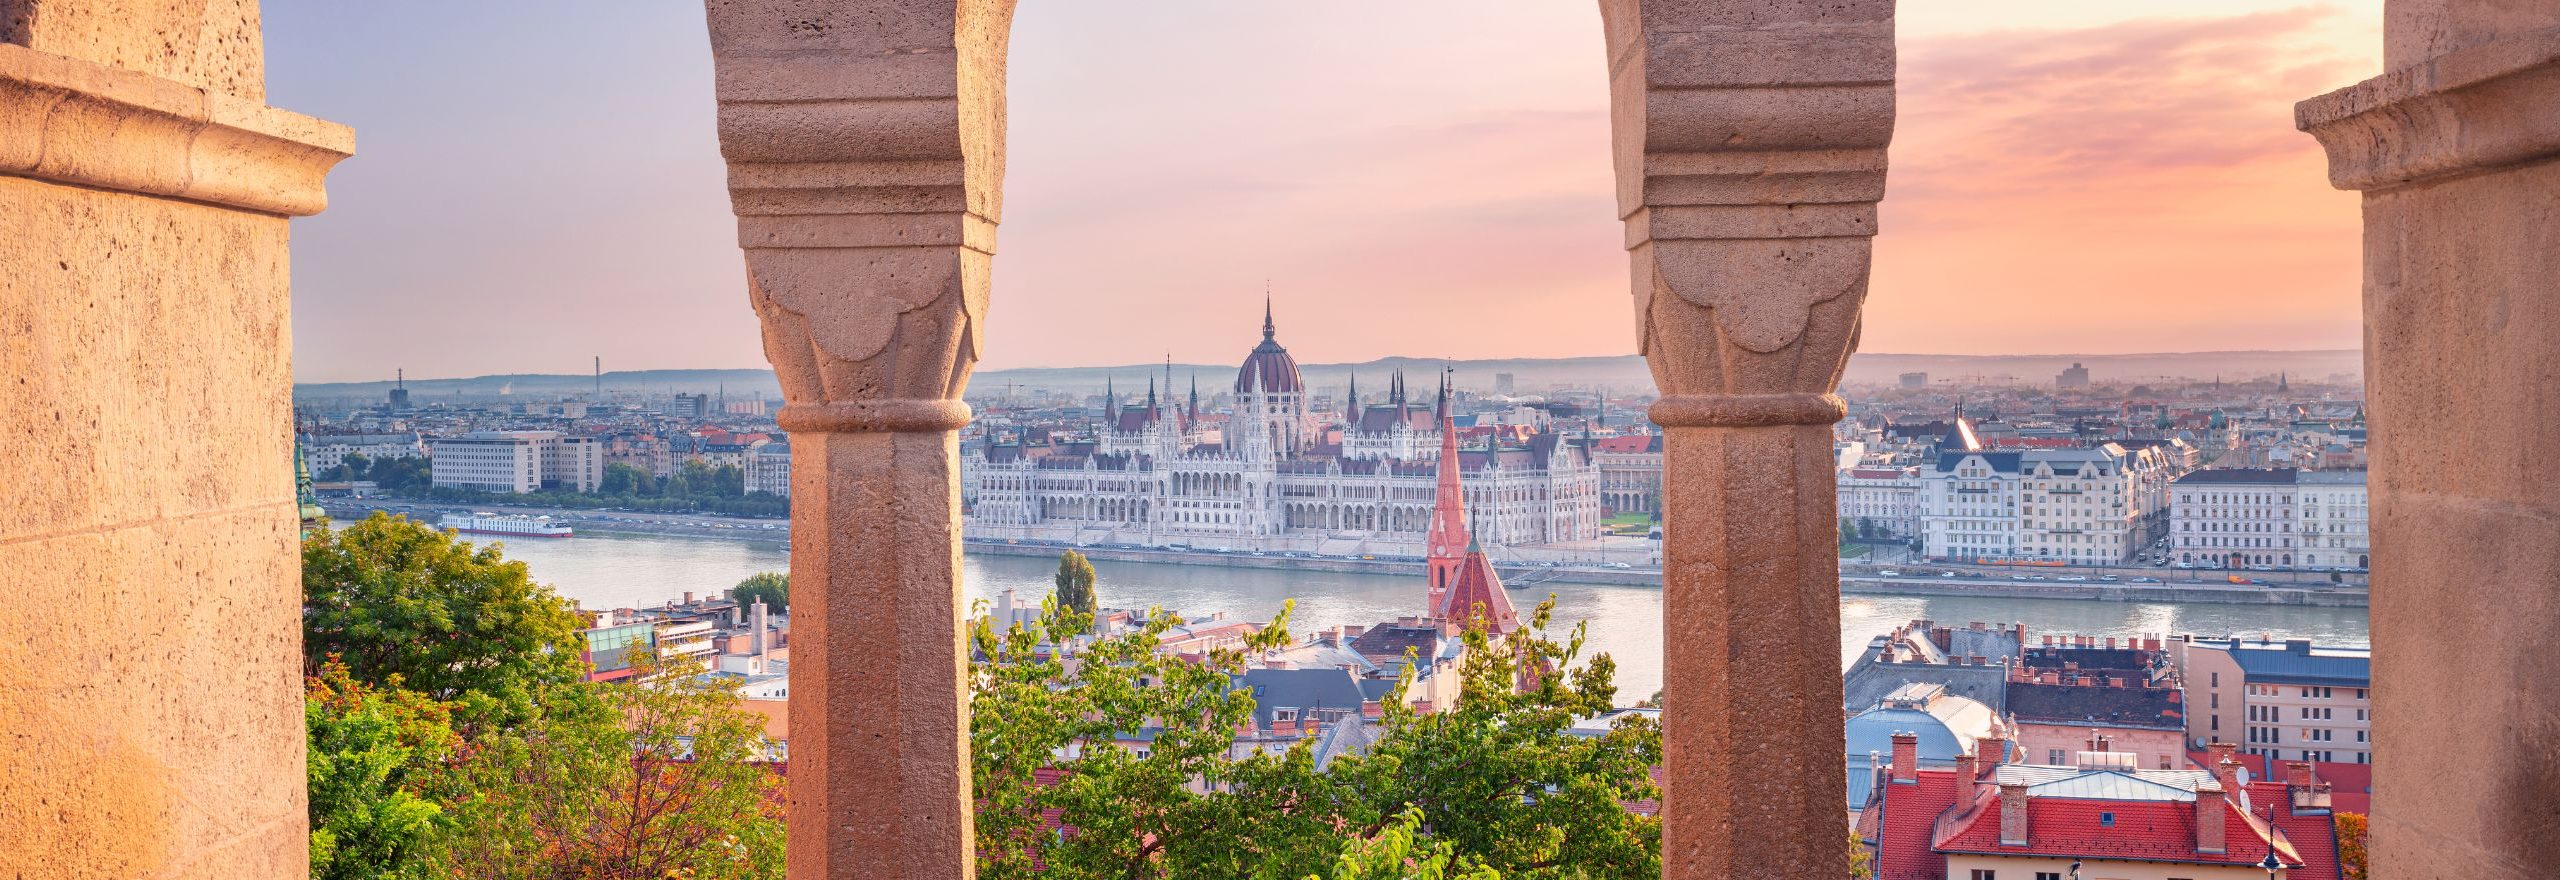 Pedaling in Hungary on this guided bike tour from Krakow to Budapest